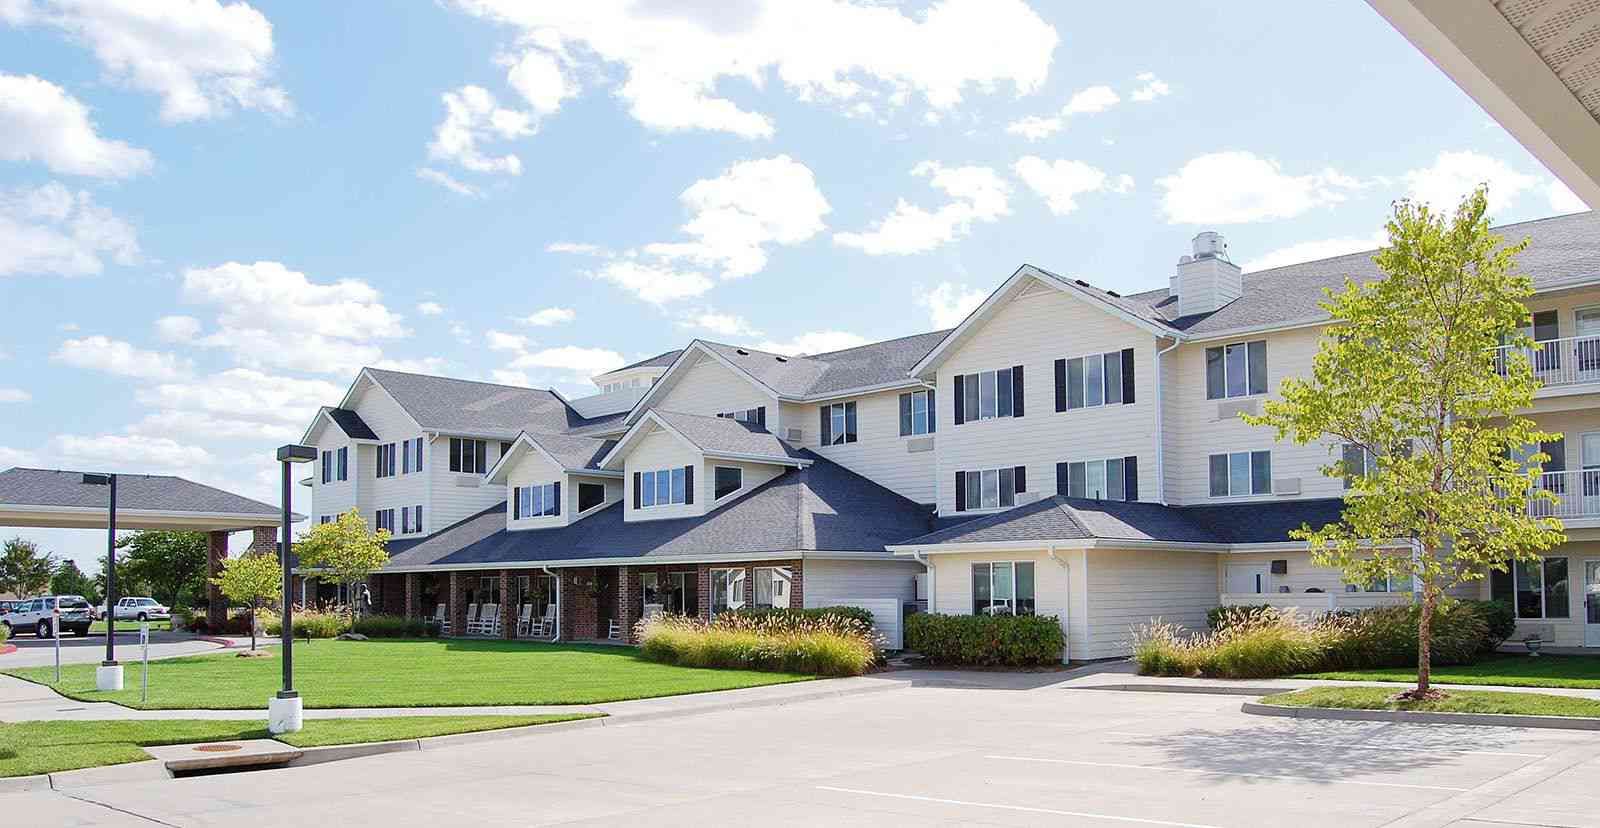 Suburban Solstice Senior Living at Lees Summit, featuring modern architecture and transportation.